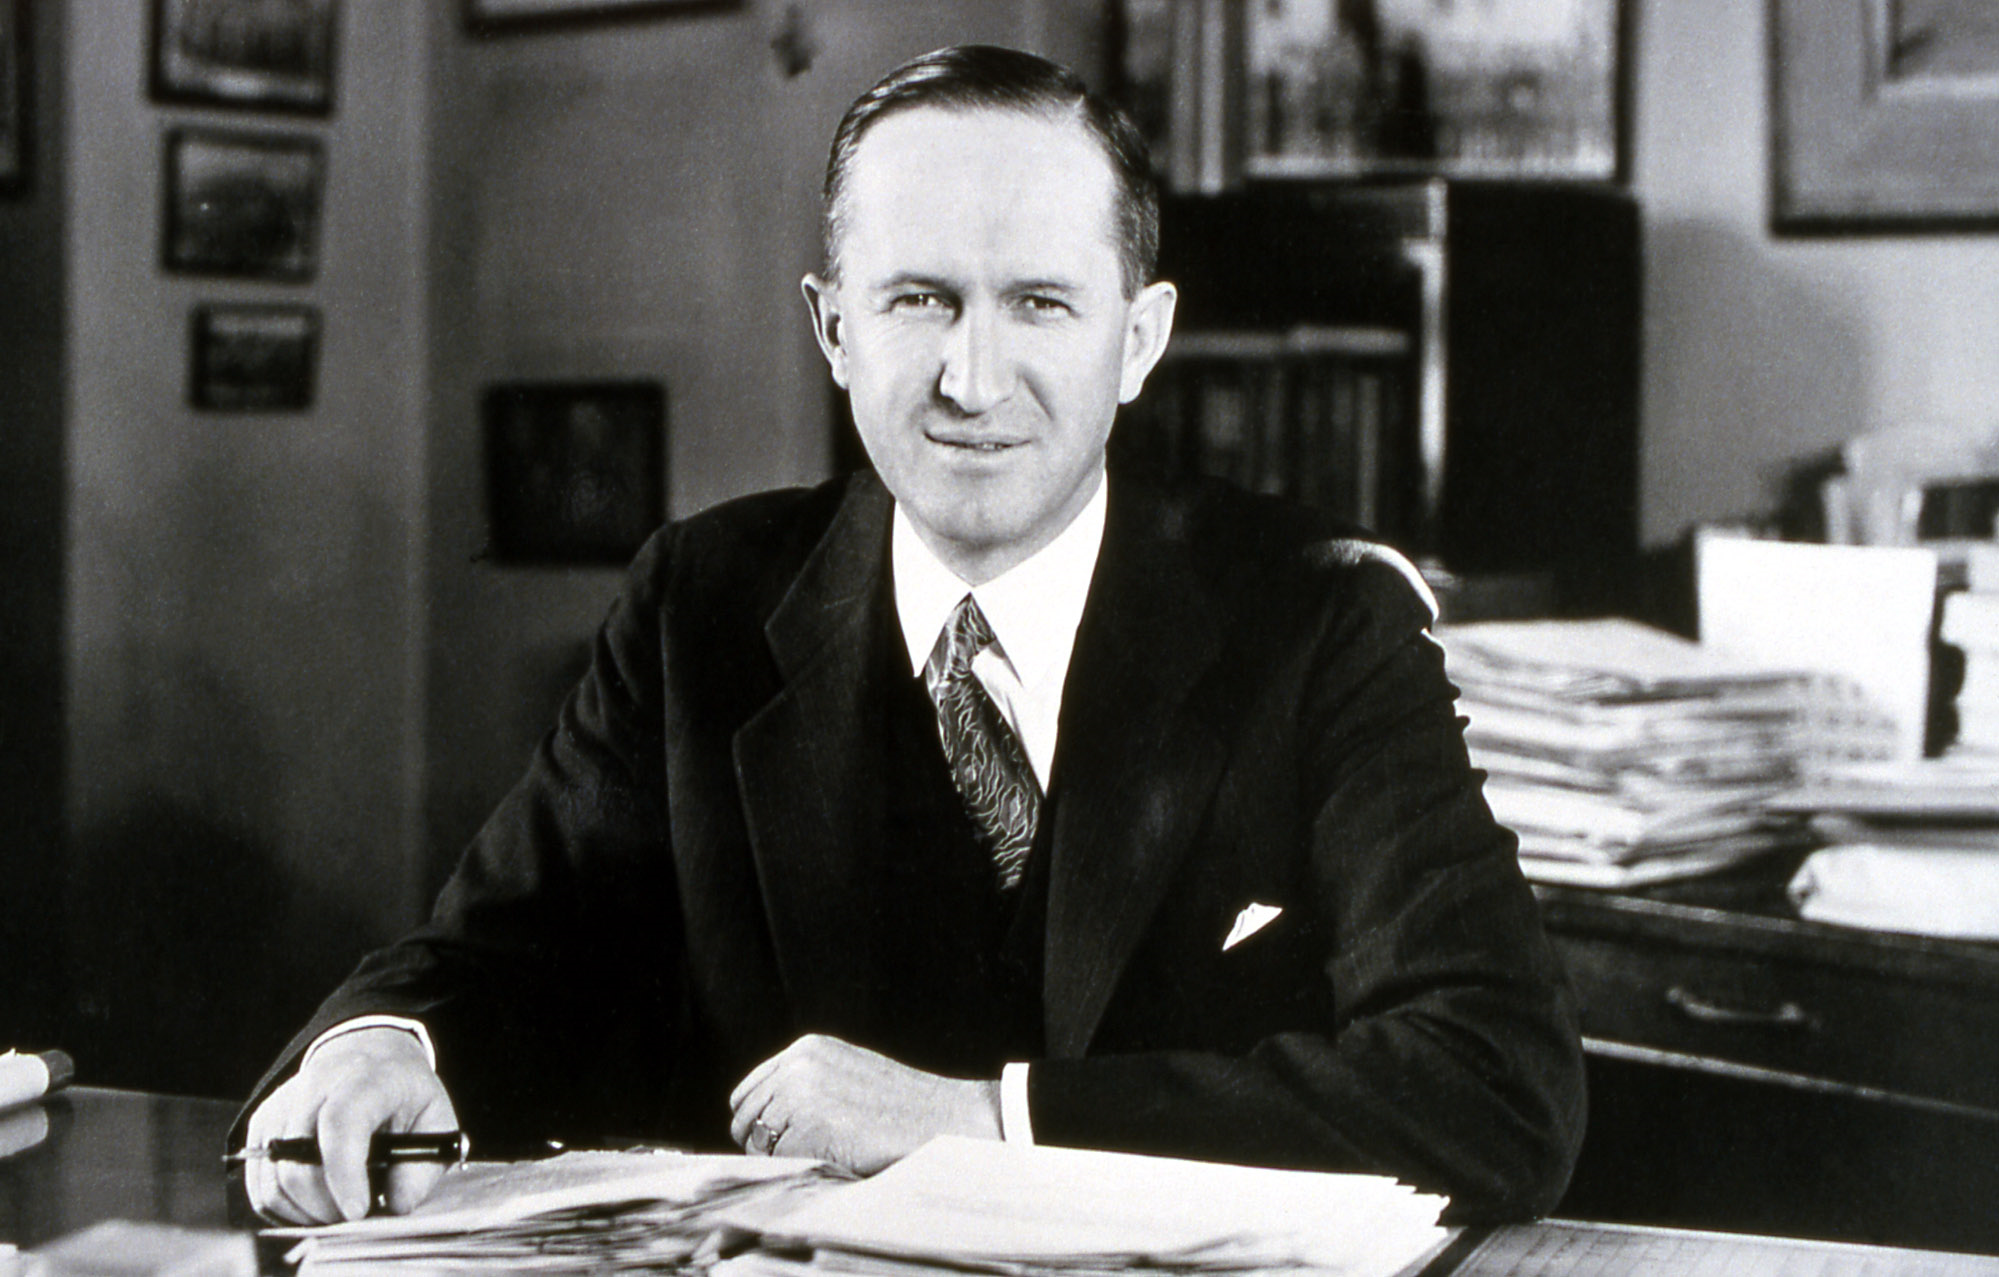 B&W photo of a man wearing a black suit sitting at a desk.